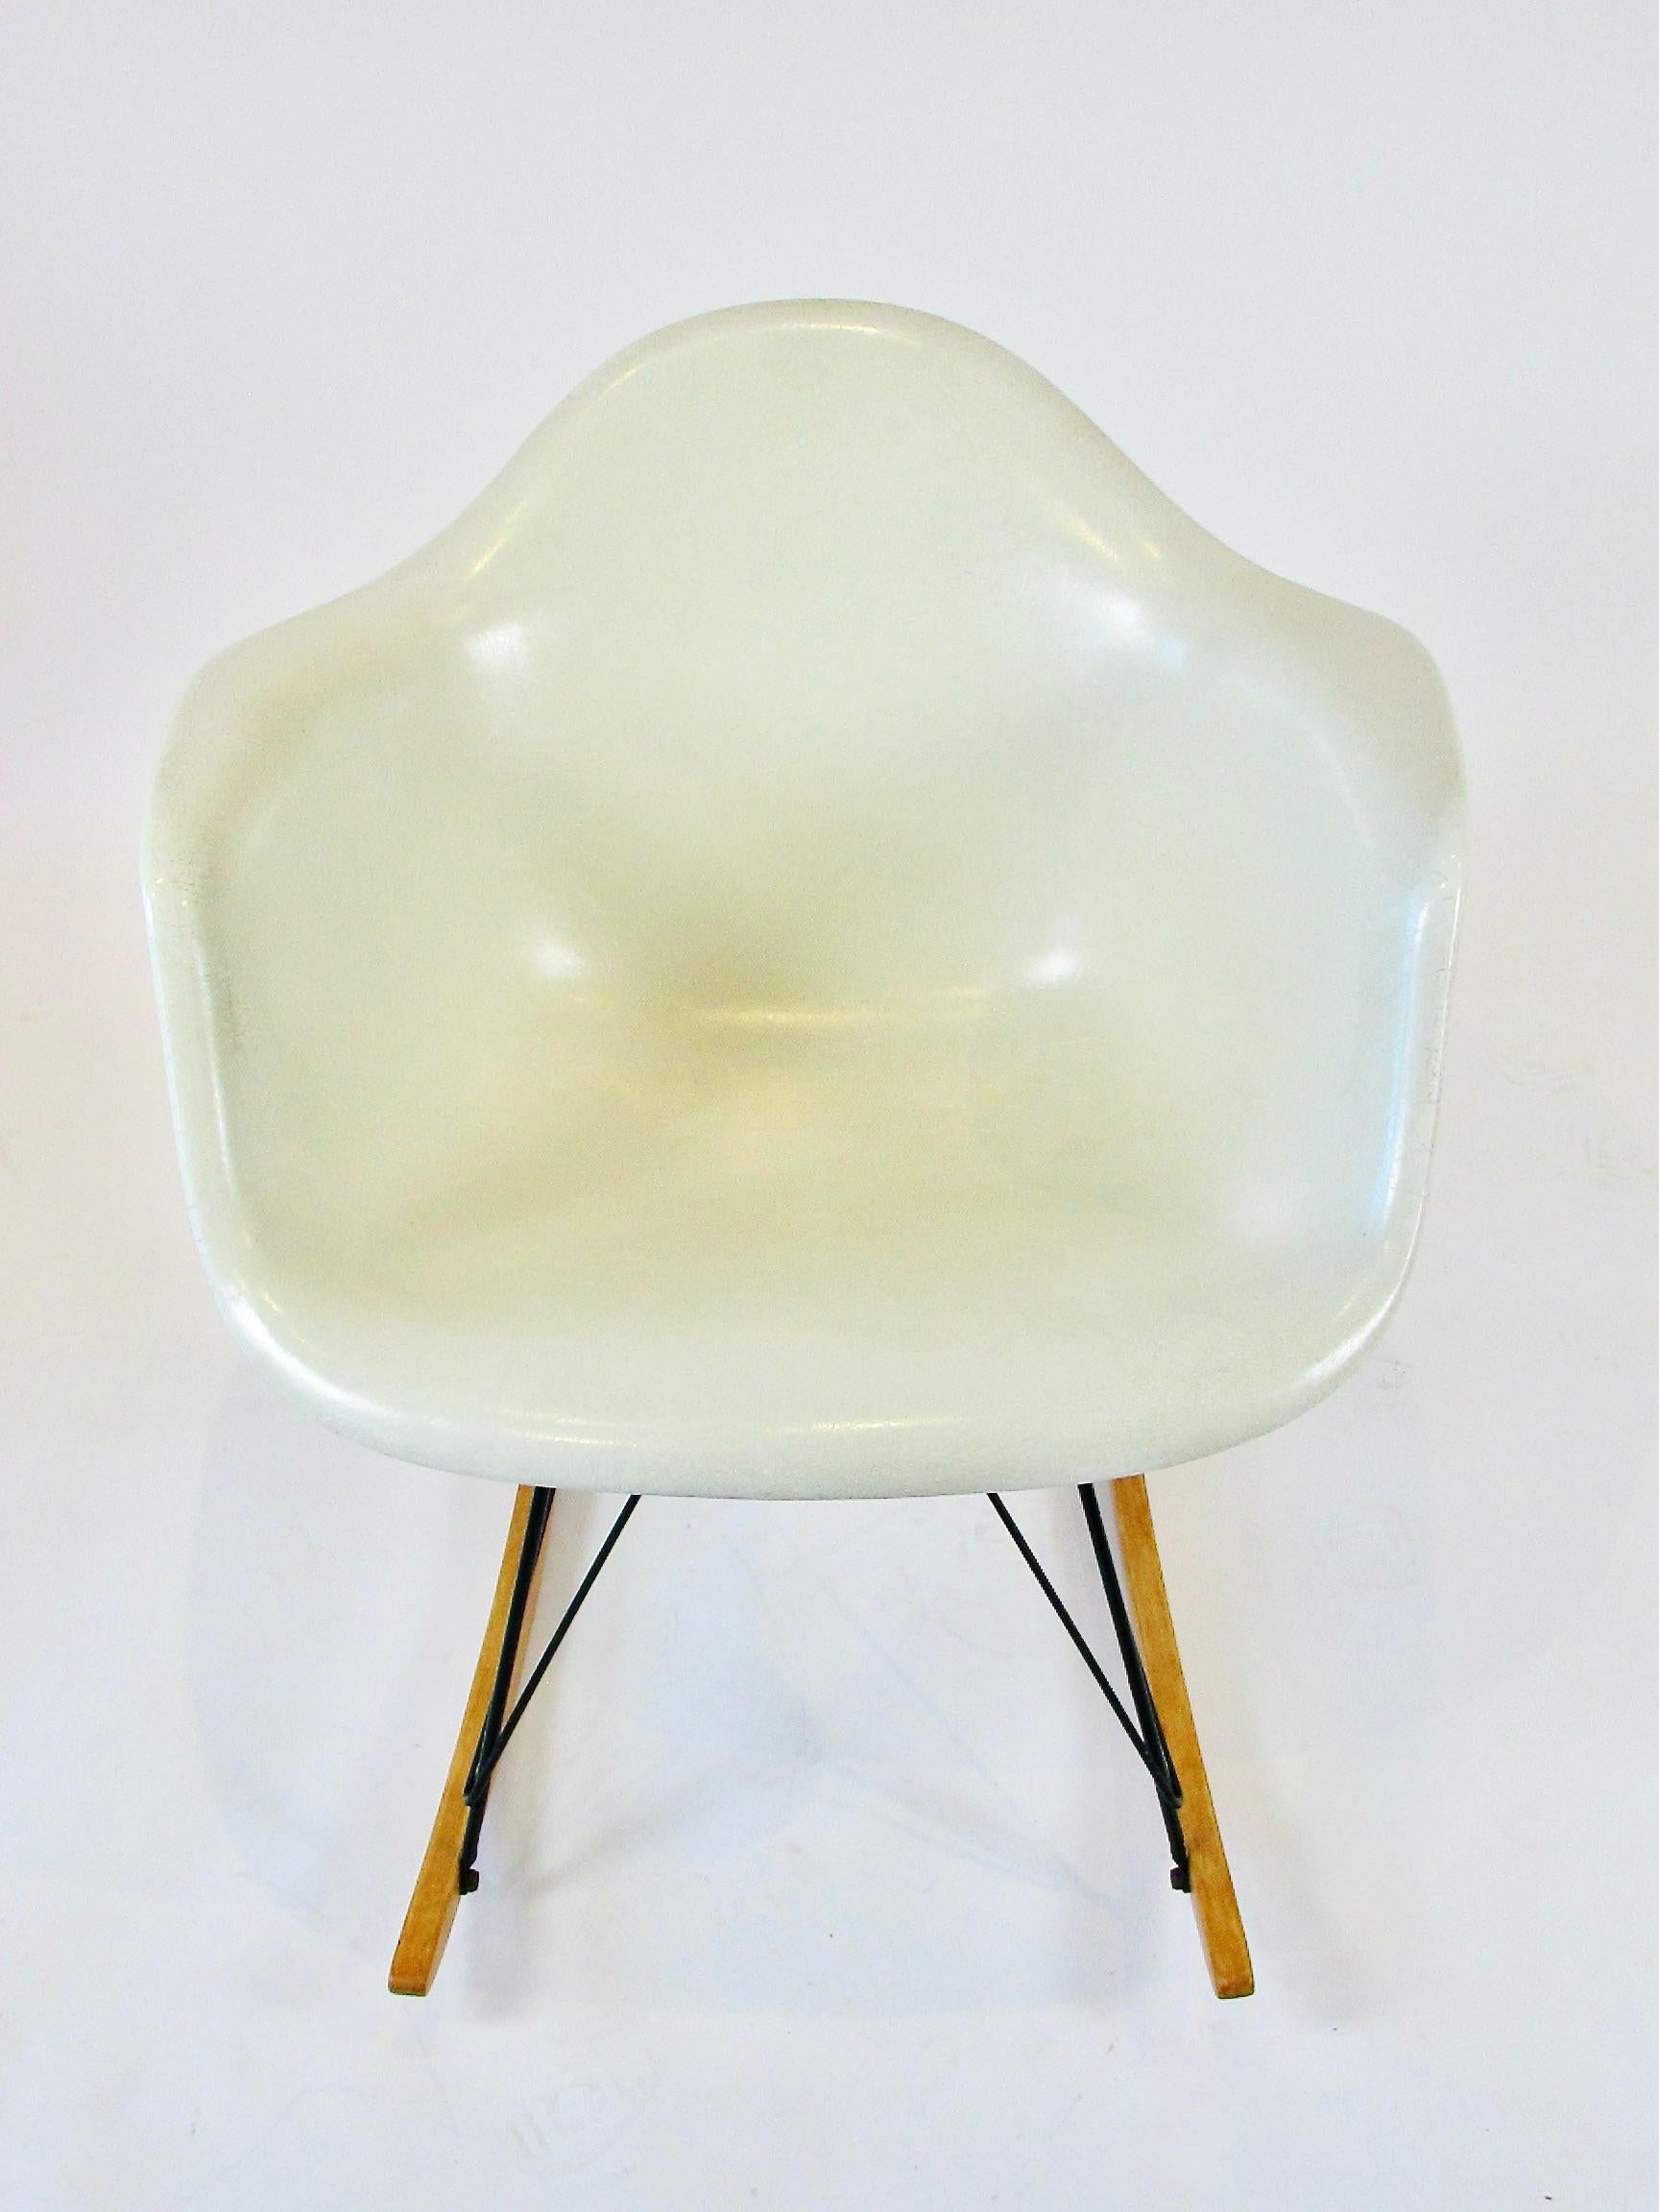 20th Century 1950s Eames for Herman Miller Fiberglass Ivory Parchment Shell RAR Rocking Chair For Sale